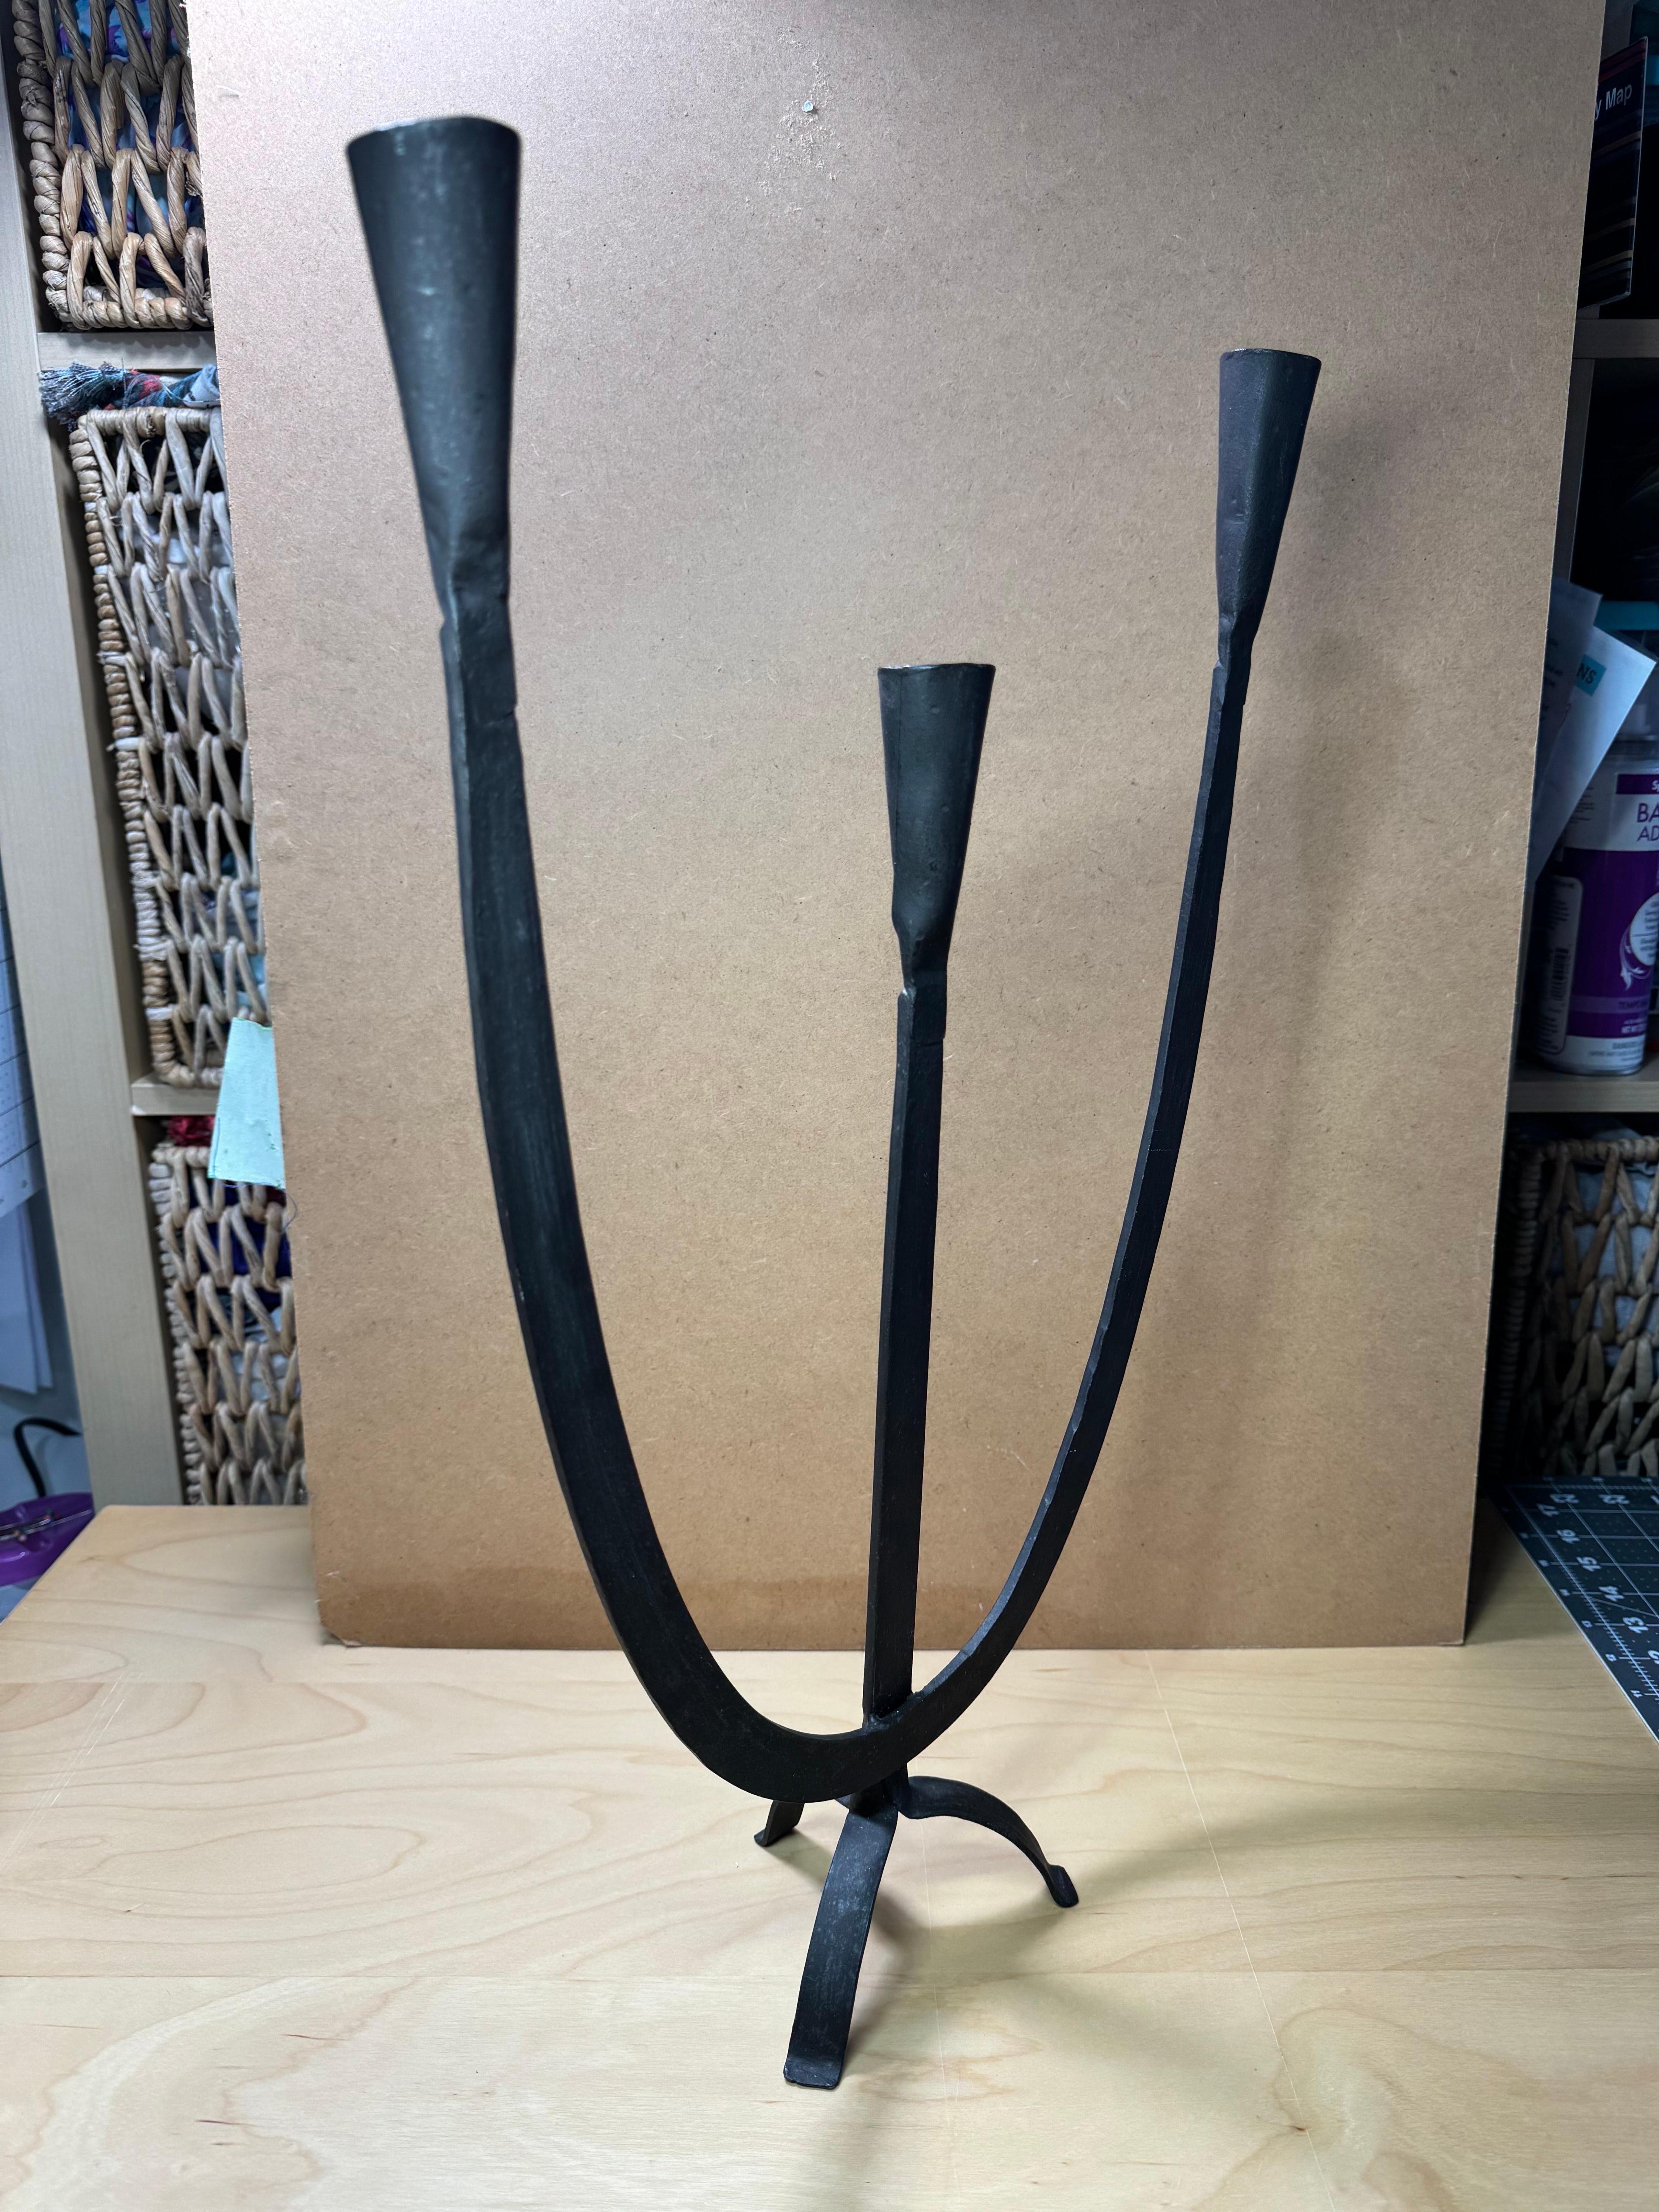 Beautiful handcrafted wrought iron mid century modern brutalist style candelabra, with a bold and dramatic design certain to attract attention and make a statement in any room.
This candelabra comes with 3 candle holders and can fit standard tapered